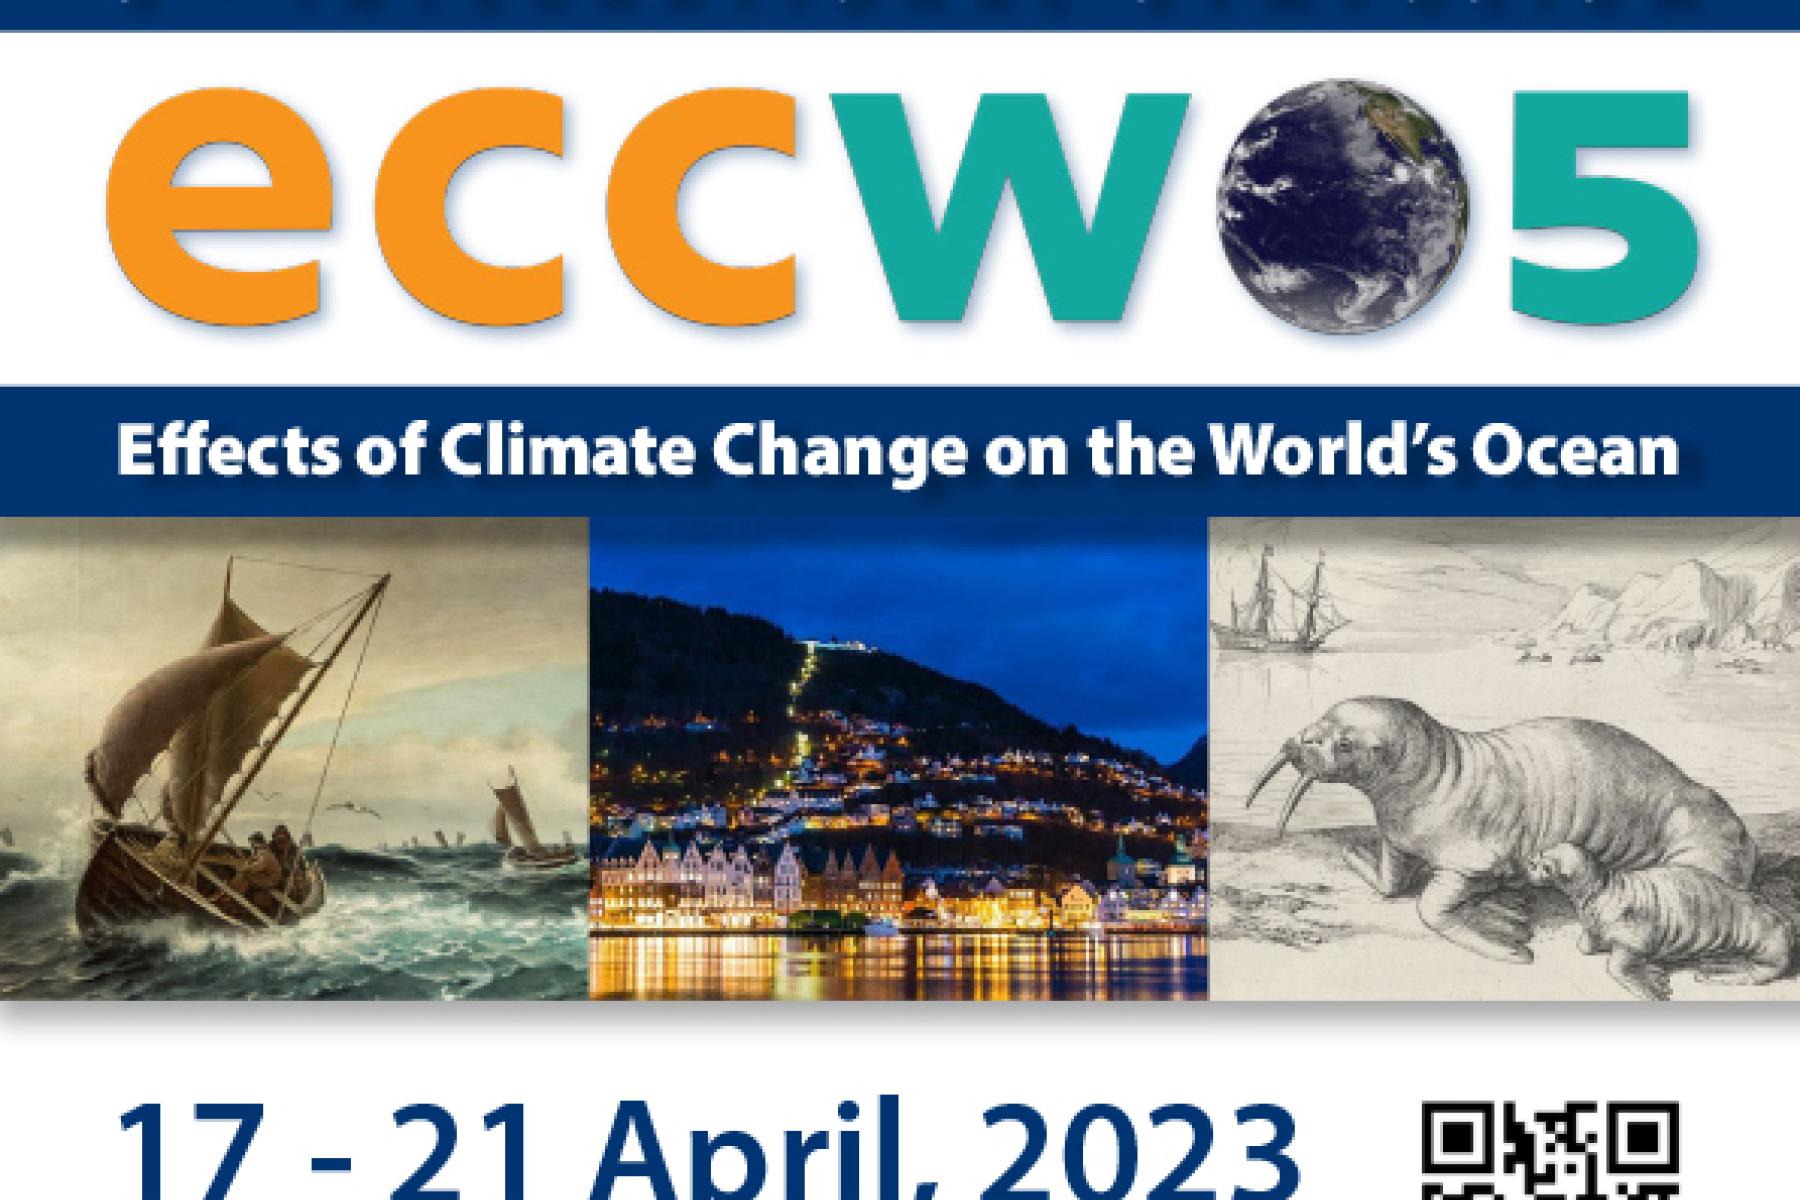 The official poster of the ECCWO5 symposium